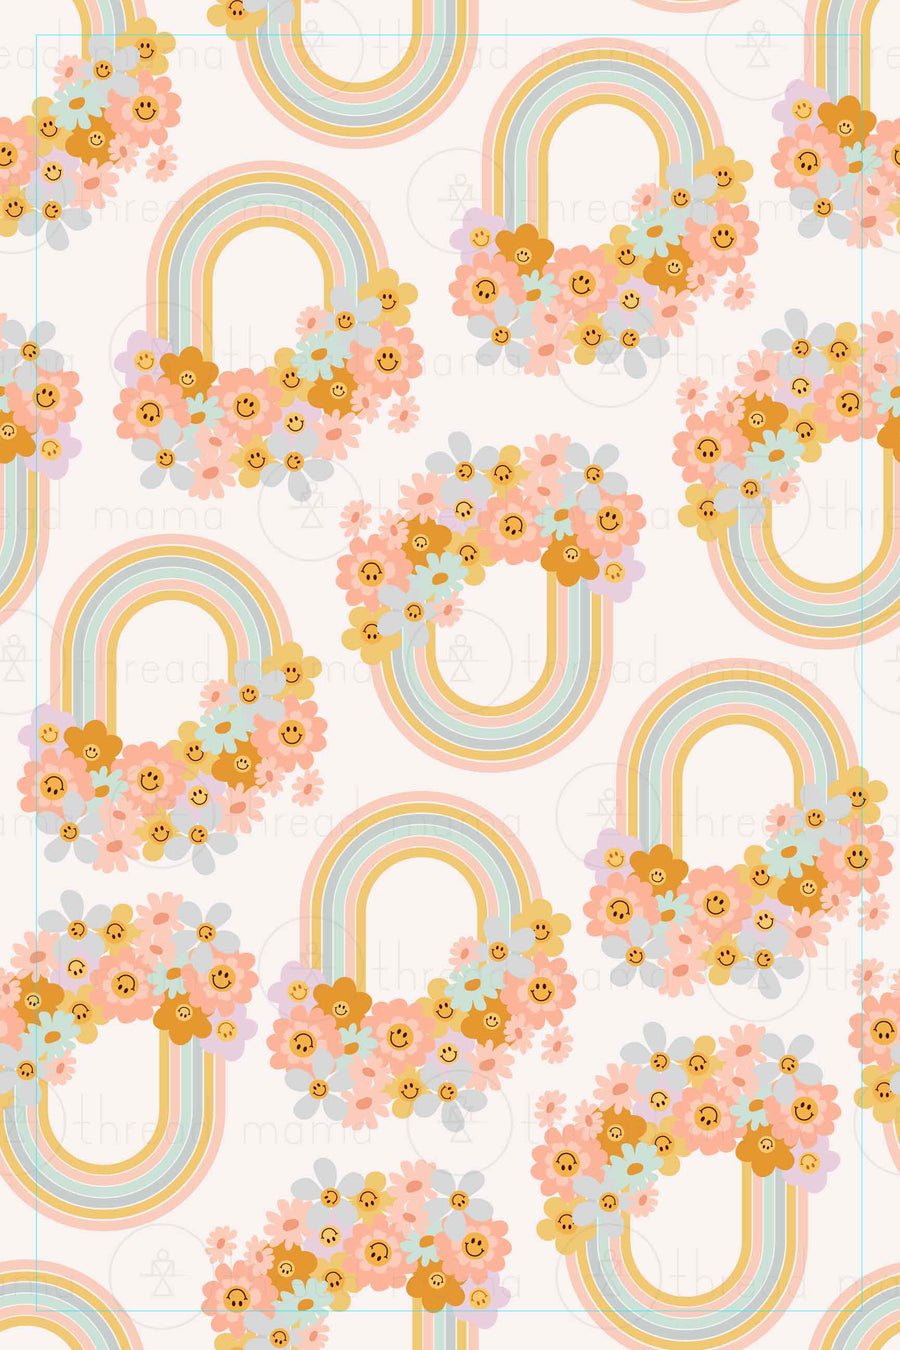 Background Pattern 65 - Rainbow Smiley Face Flowers